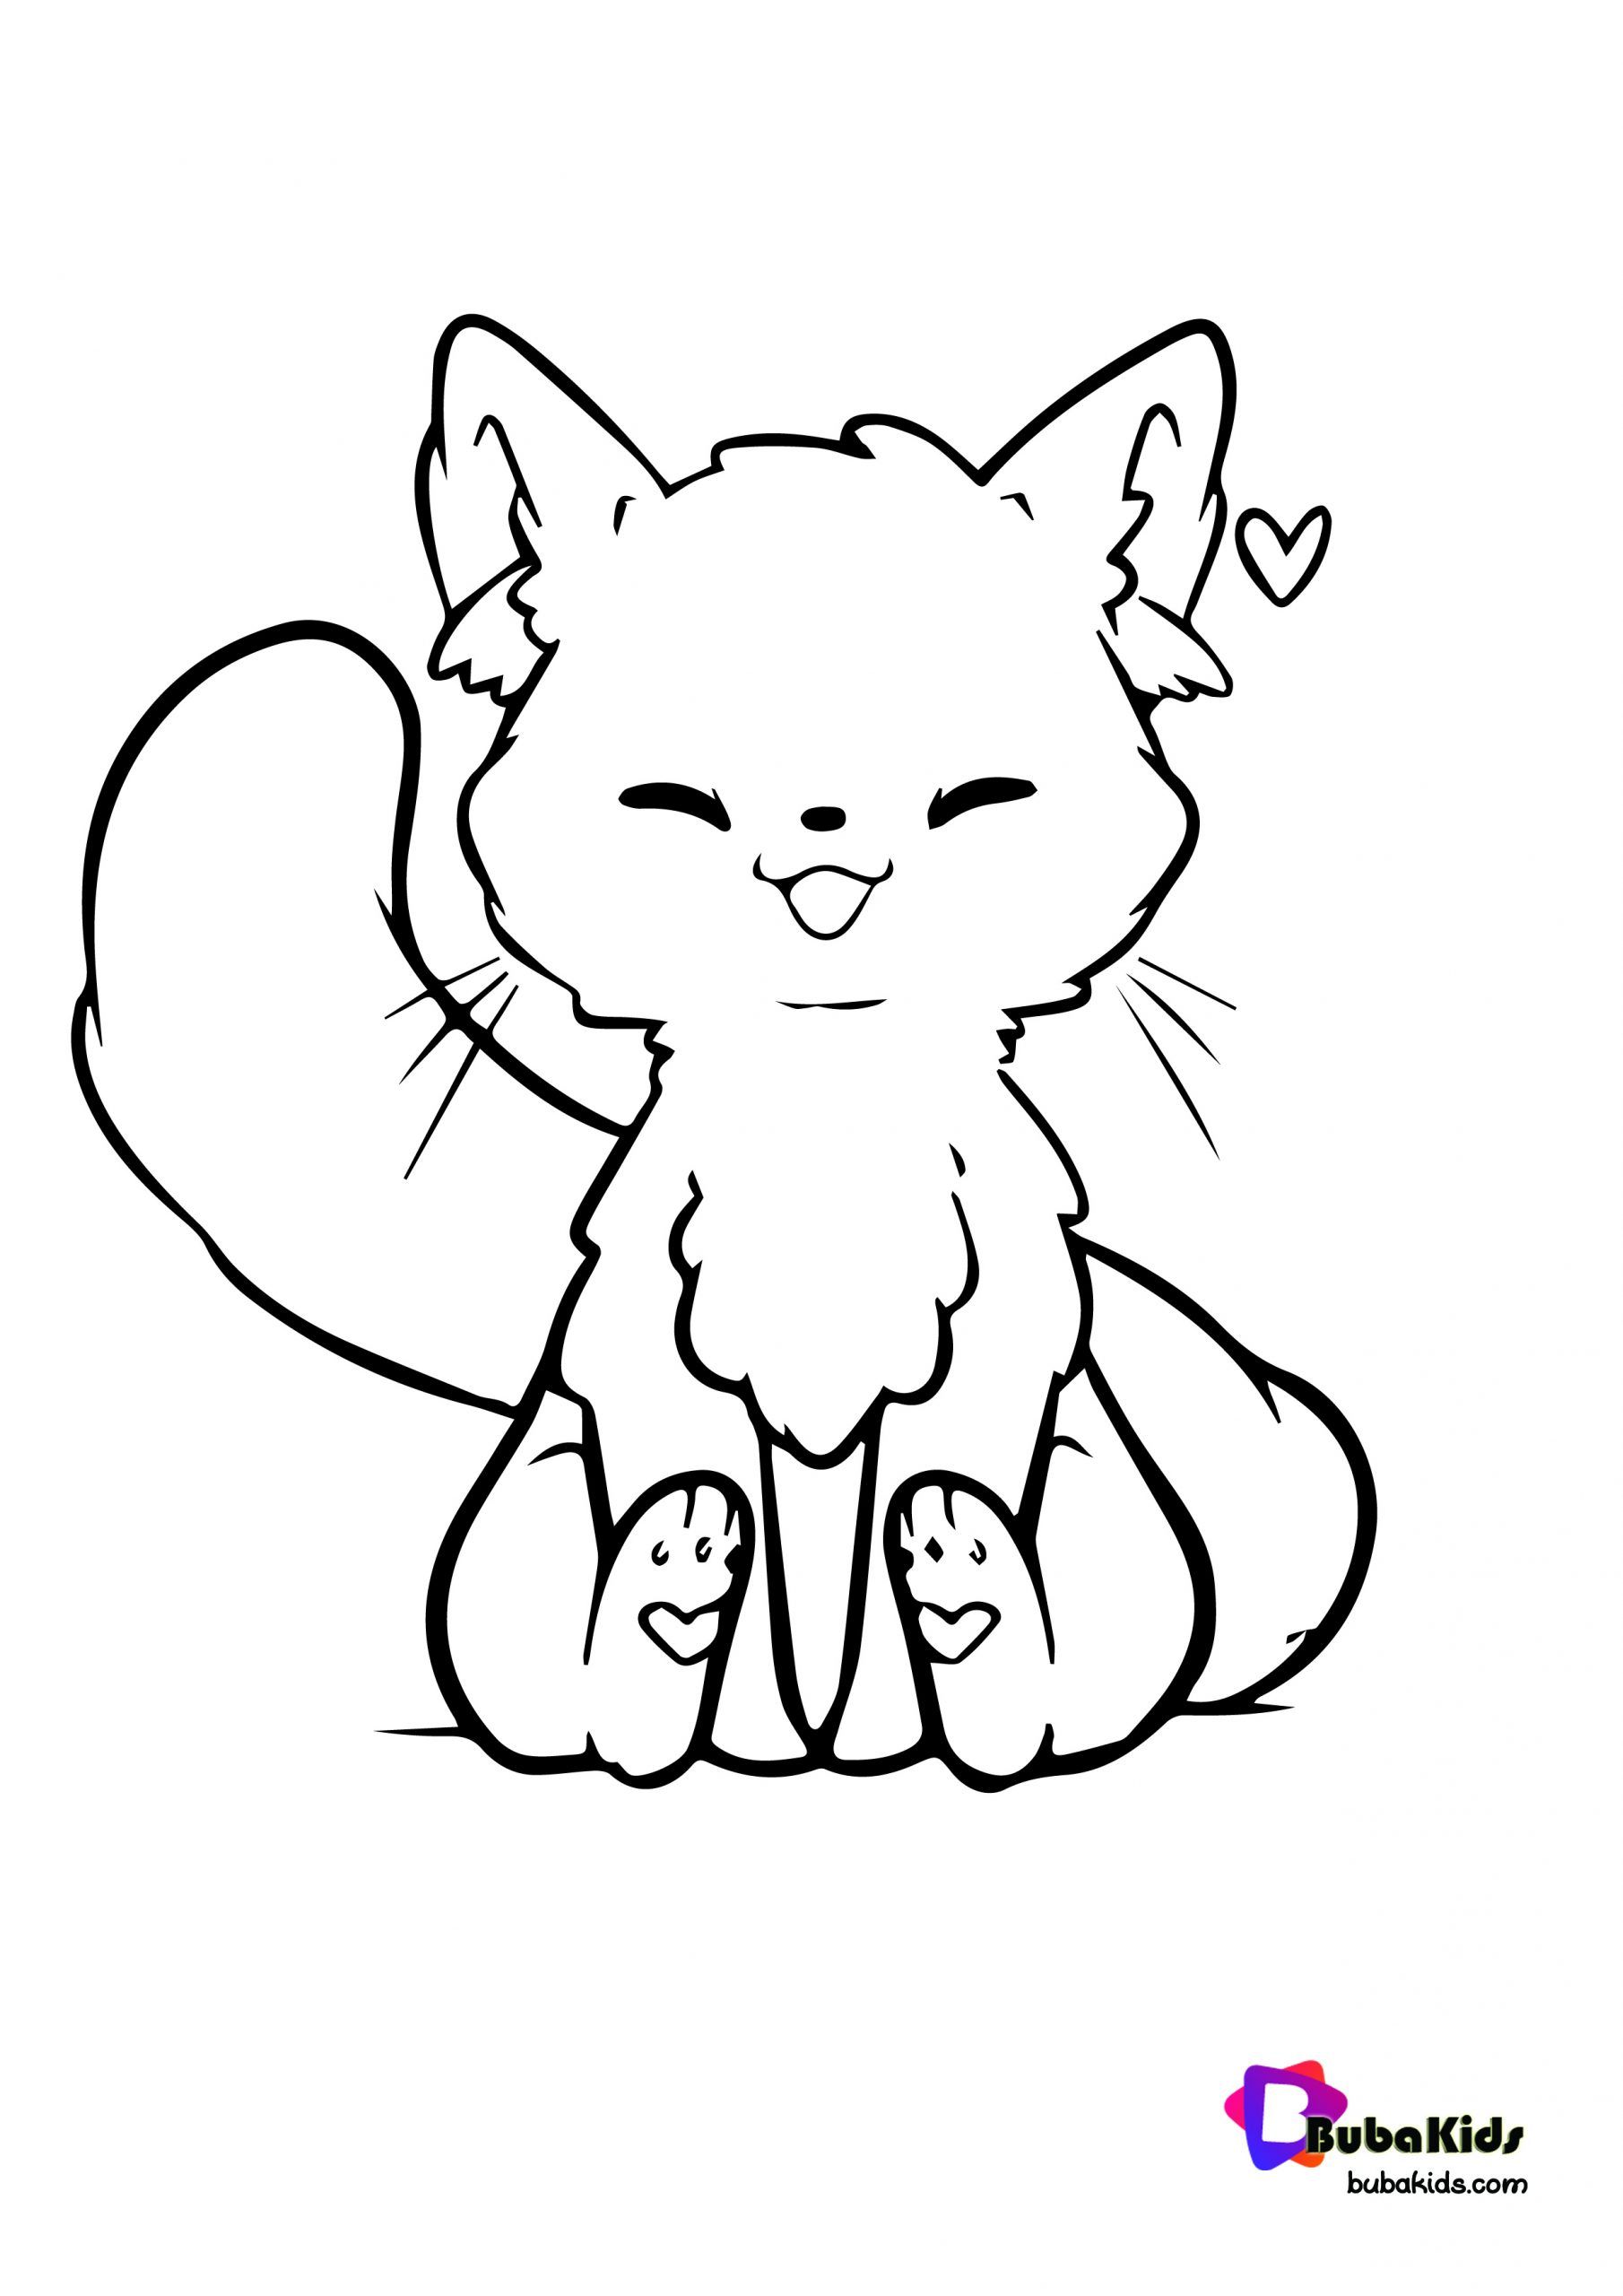 Kawaii Cat Coloring Pages   Coloring Home